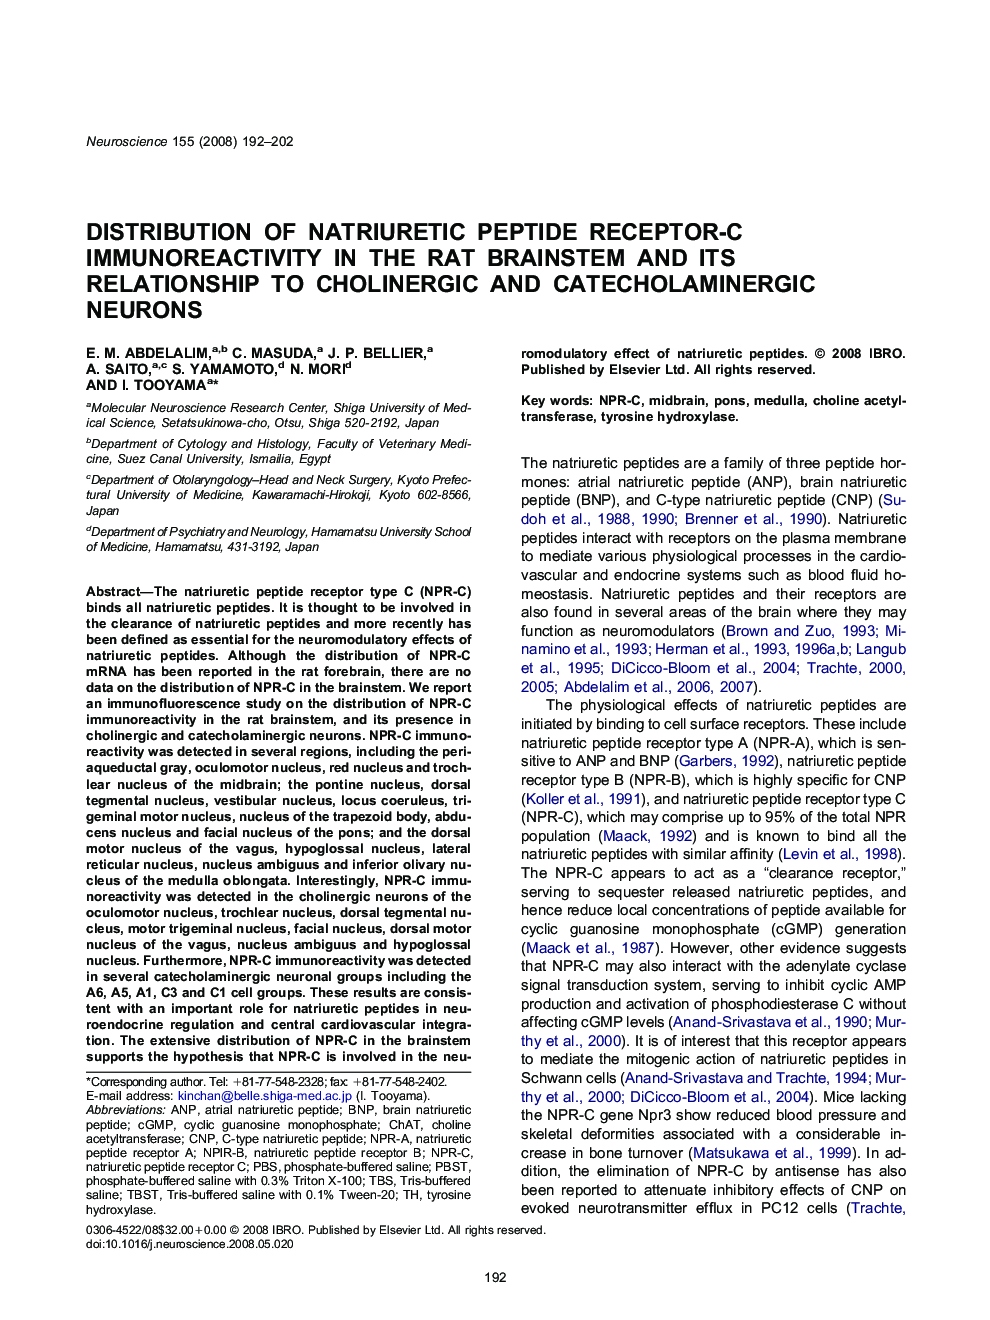 Distribution of natriuretic peptide receptor-C immunoreactivity in the rat brainstem and its relationship to cholinergic and catecholaminergic neurons